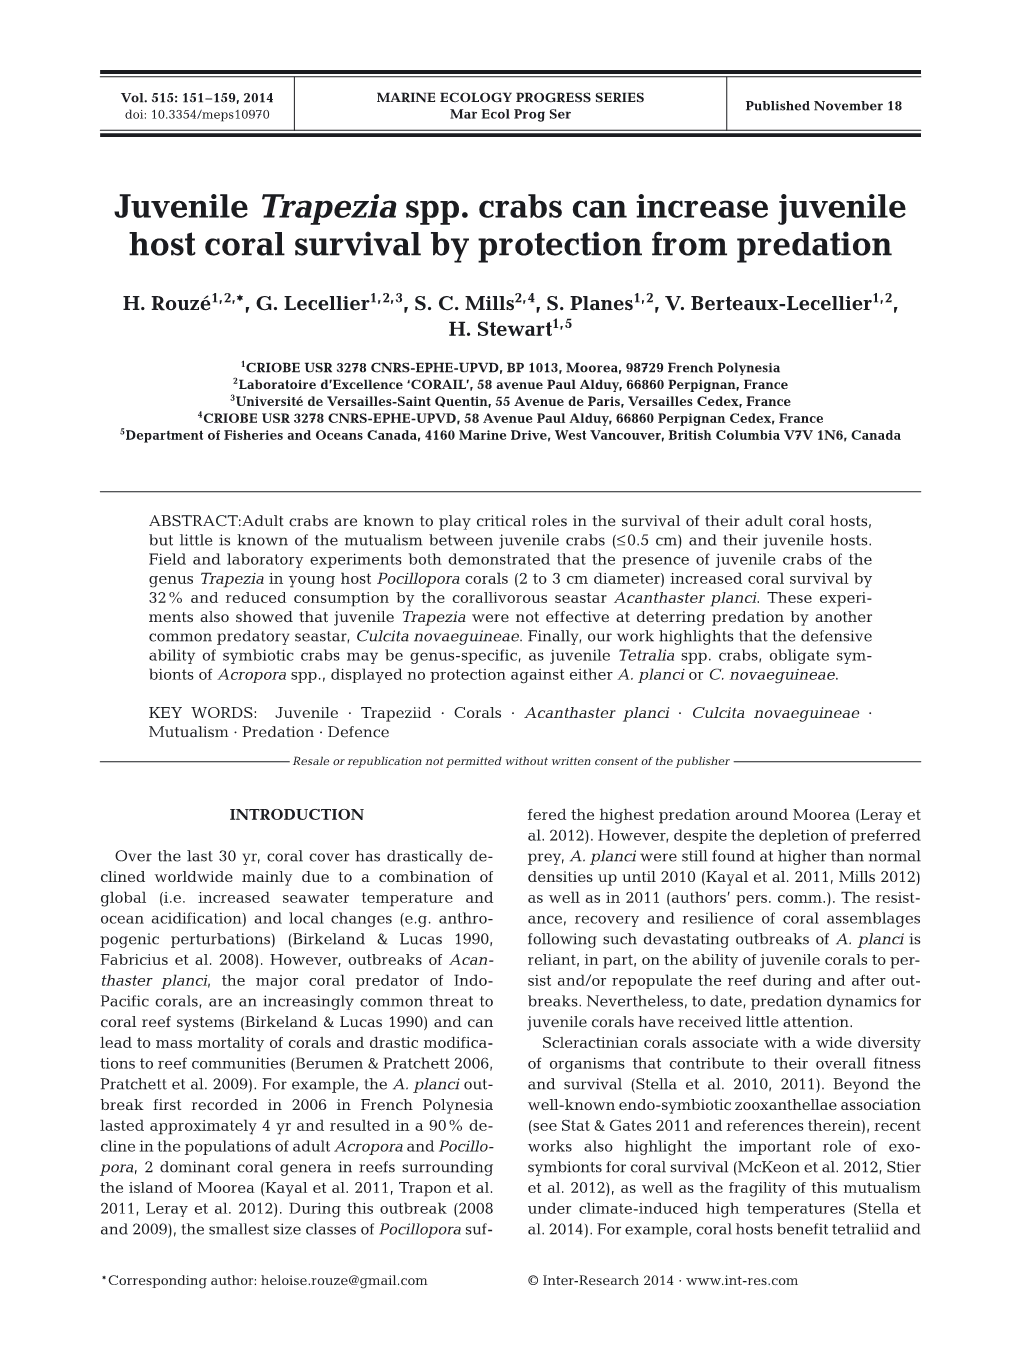 Juvenile Trapezia Spp. Crabs Can Increase Juvenile Host Coral Survival by Protection from Predation